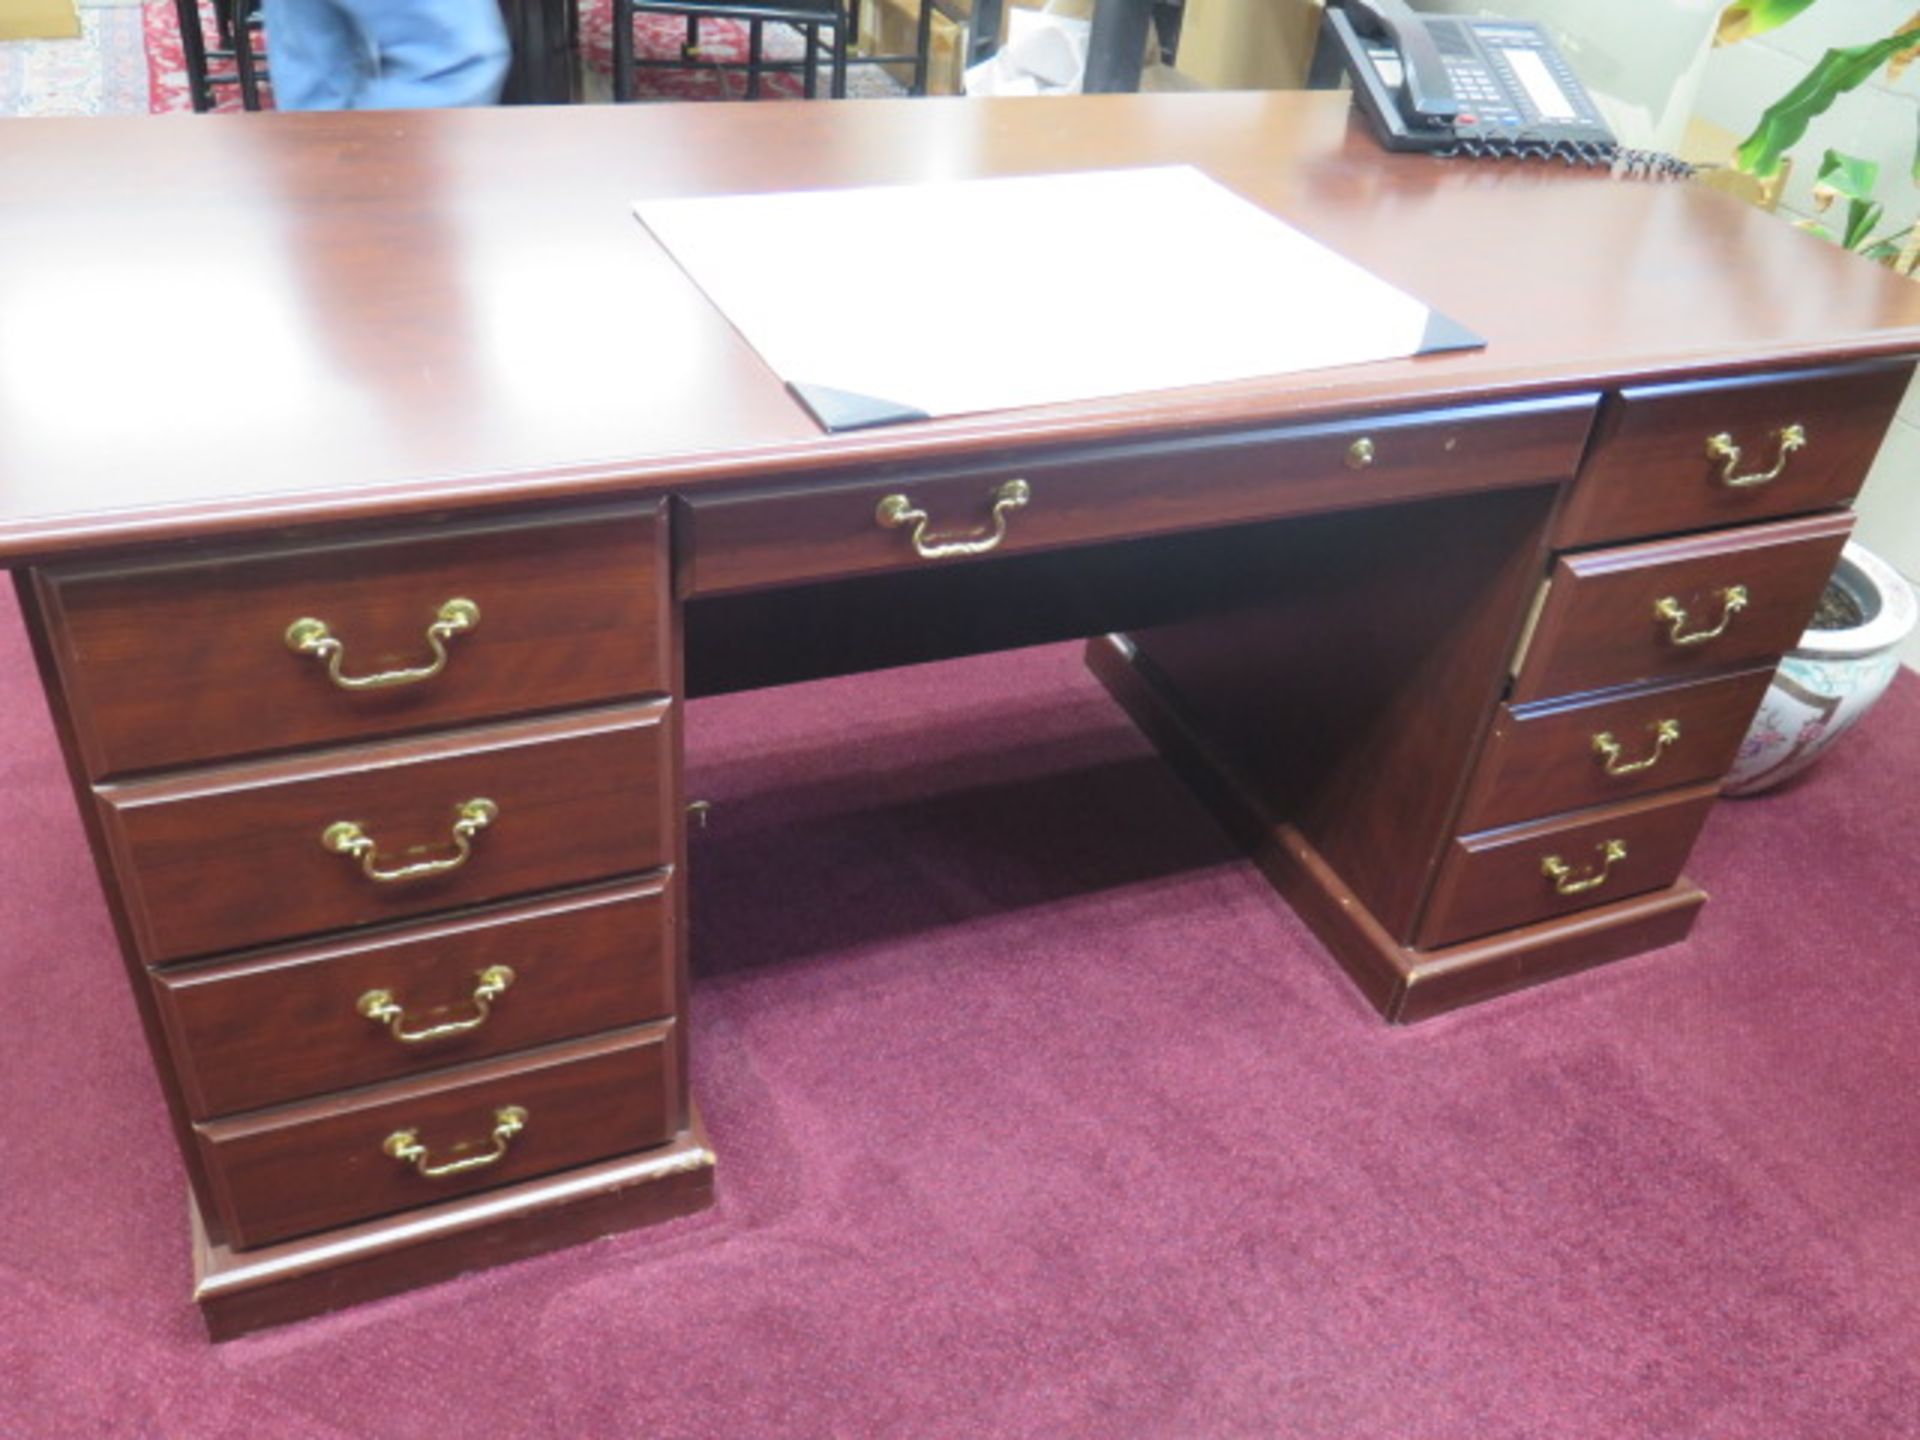 Execitive Desk, Credenza, Cabinet and File Cabinet (SOLD AS-IS - NO WARRANTY) - Image 4 of 5